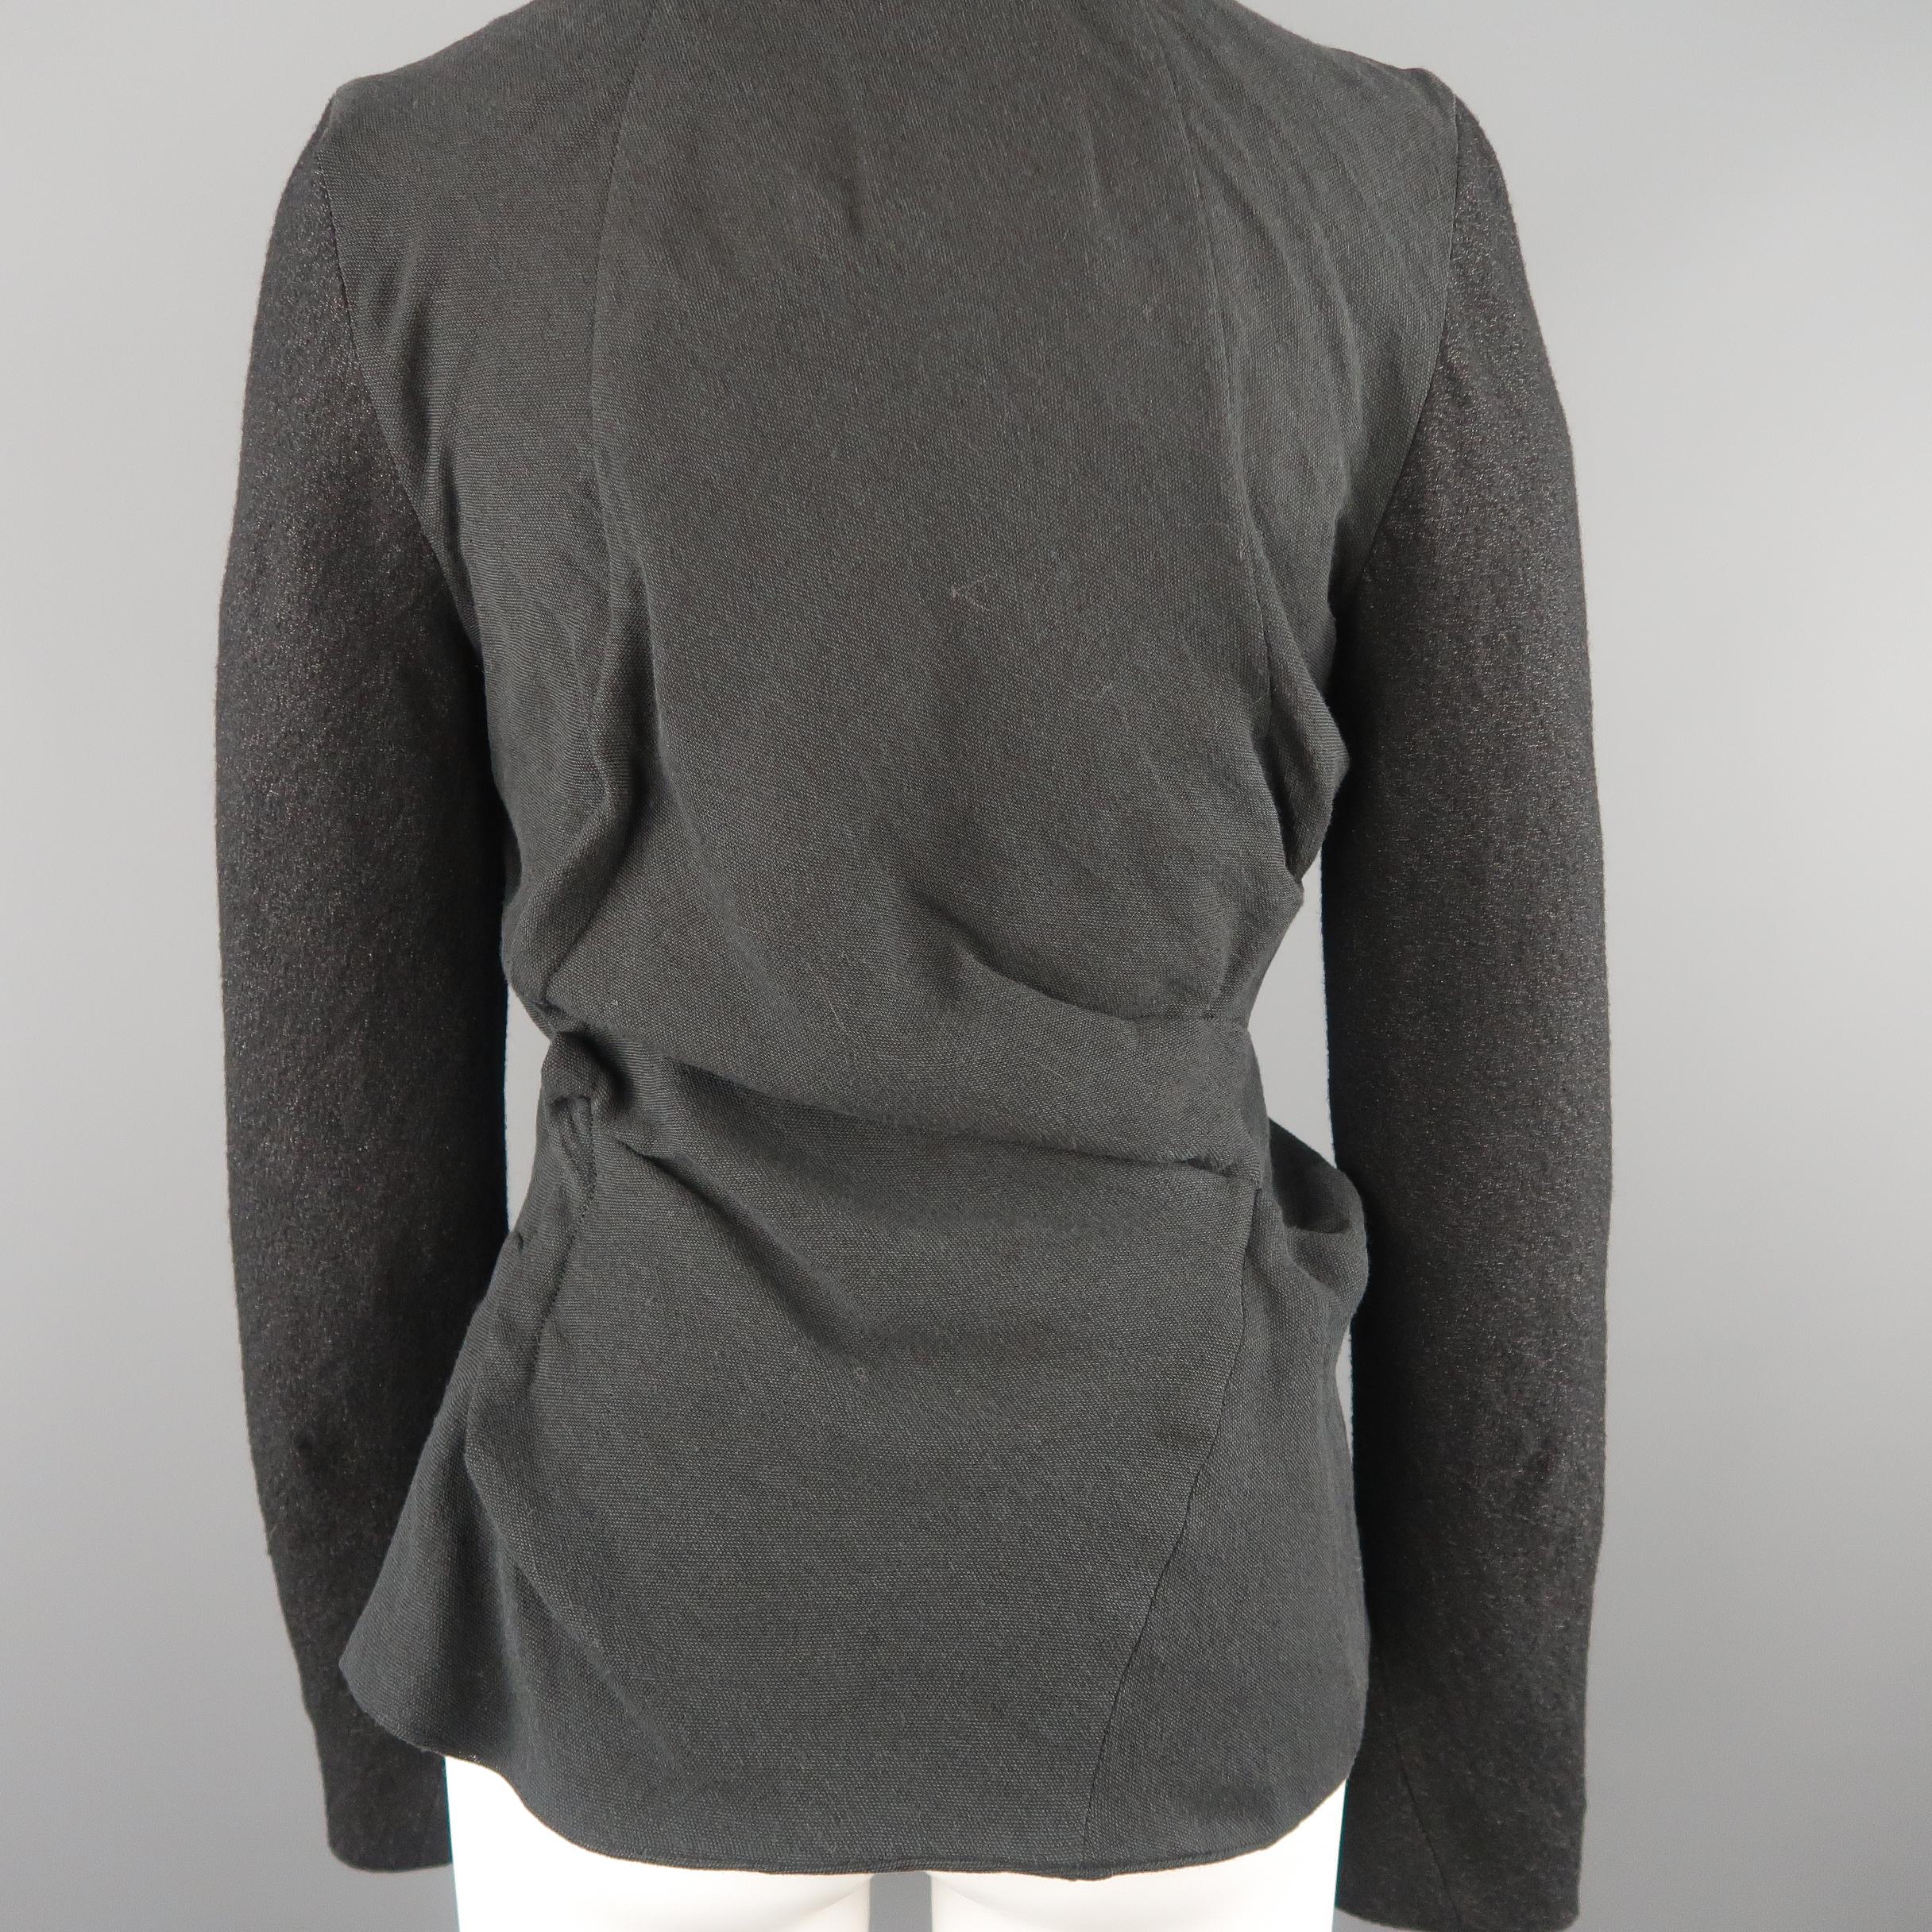 LOST & FOUND Size S Charcoal & Black Ruched Body Jacket 5